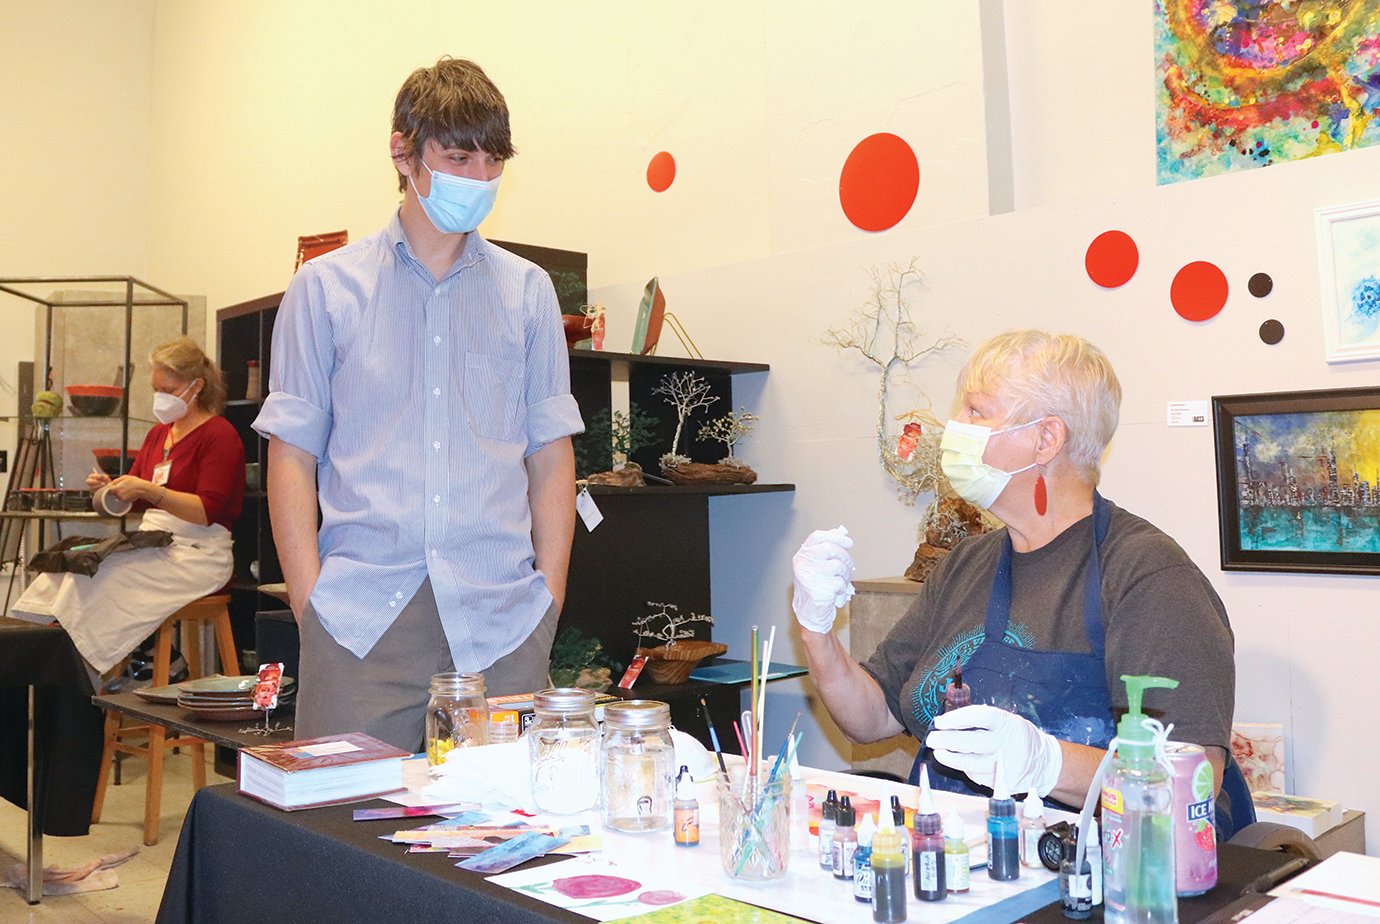 Member artist Ellie Dieckmeyer, right, demonstrates her alcohol-based ink medium Sunday at the Athens Arts Gallery to helper Jacob Ott.